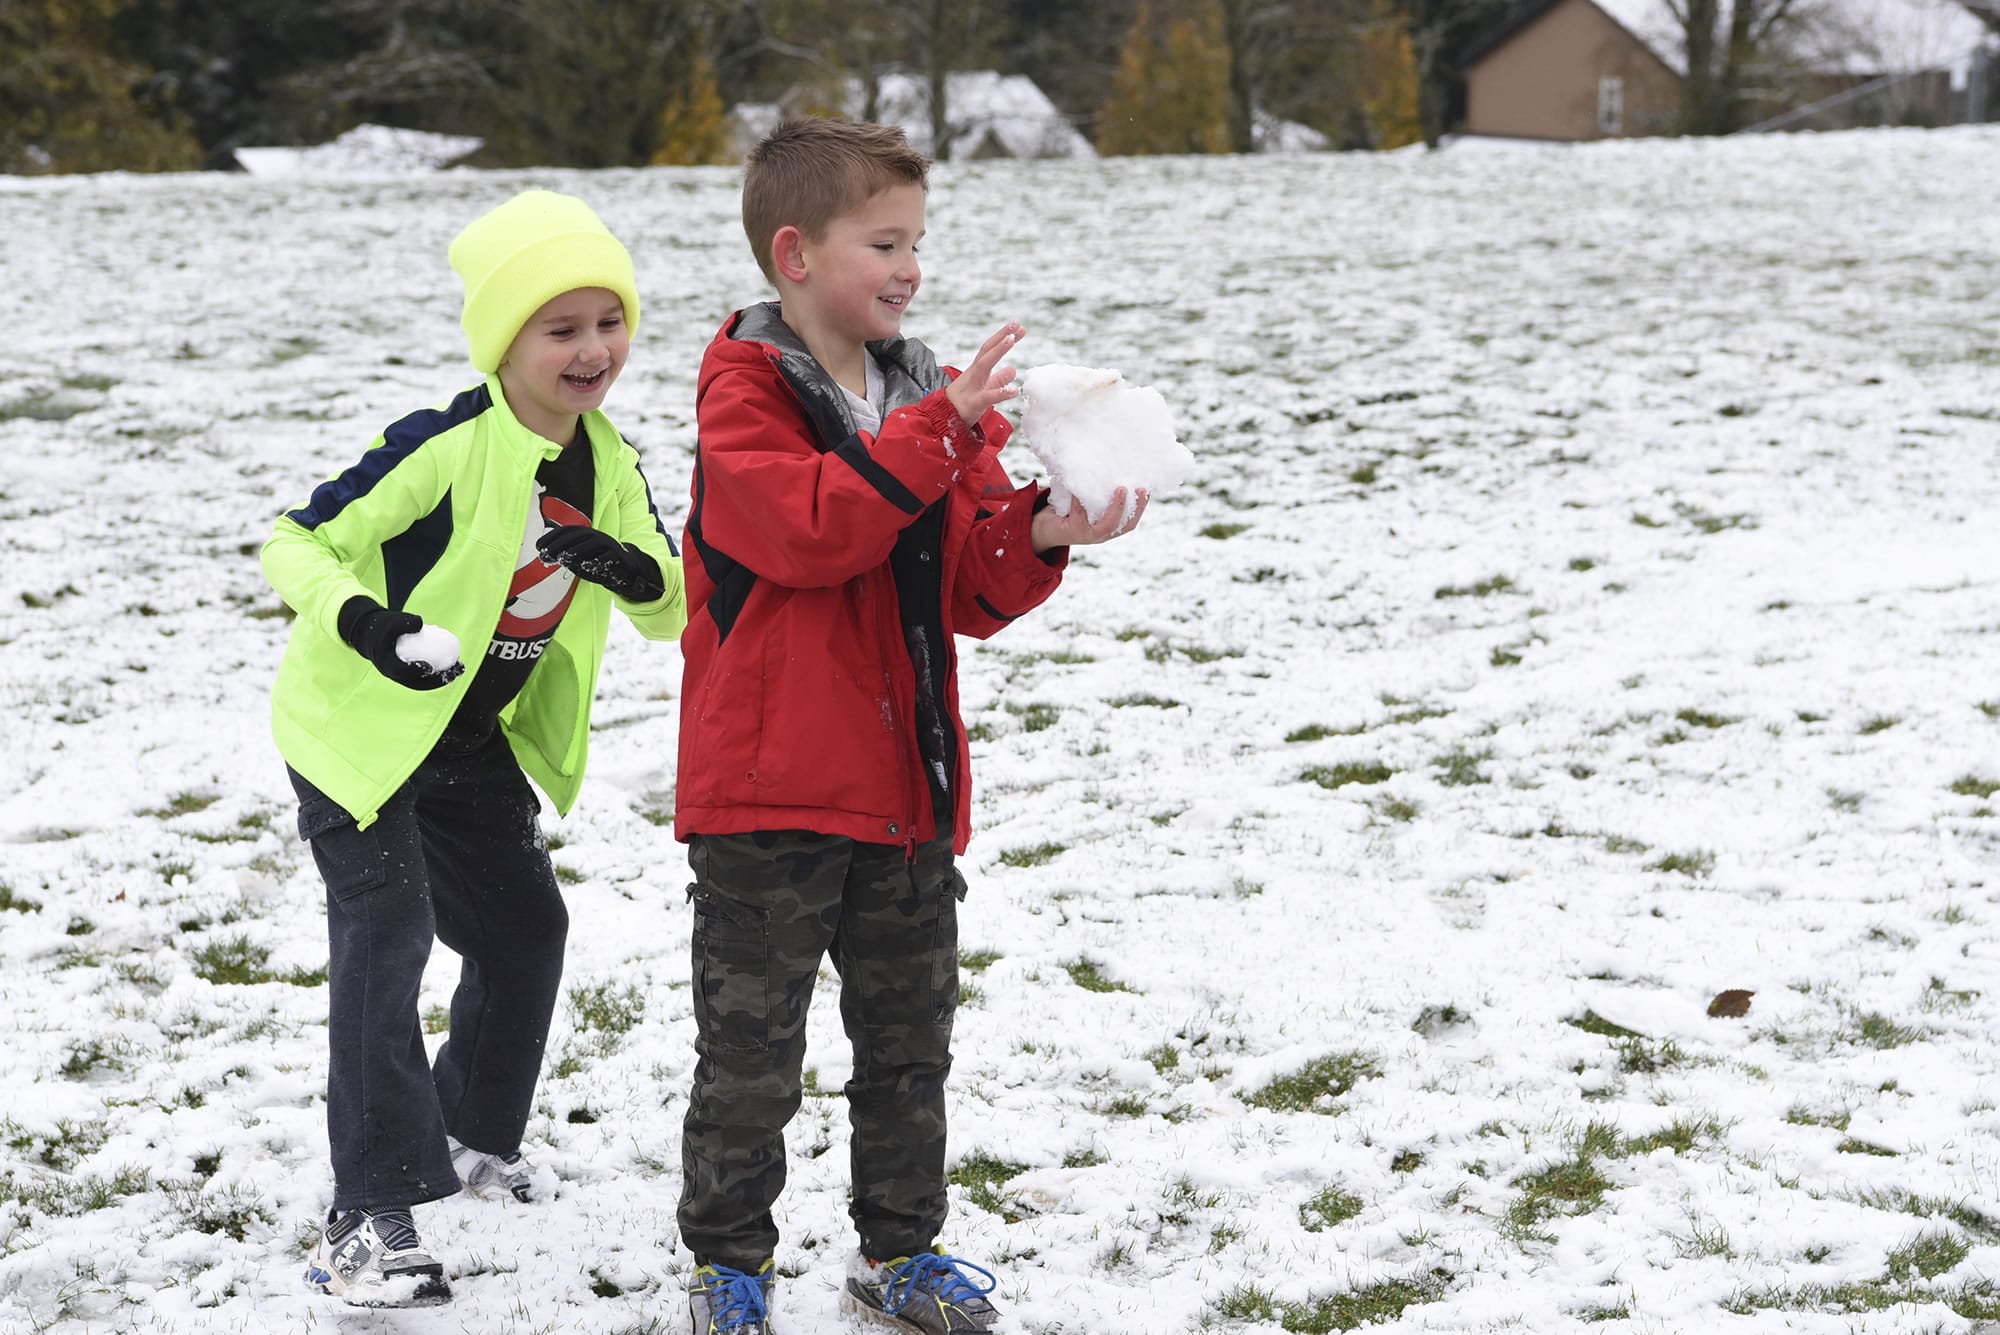 Kindergartener Evan Salmon, center, prepares a giant snowball while Daniel Blaser sneaks up behind him with a snowball during recess at Prune Hill Elementary School on Dec. 5. There was school that day, but the Camas School District canceled 10 days of school this school year due to snow and inclement weather. The district received a waiver for four of those days.